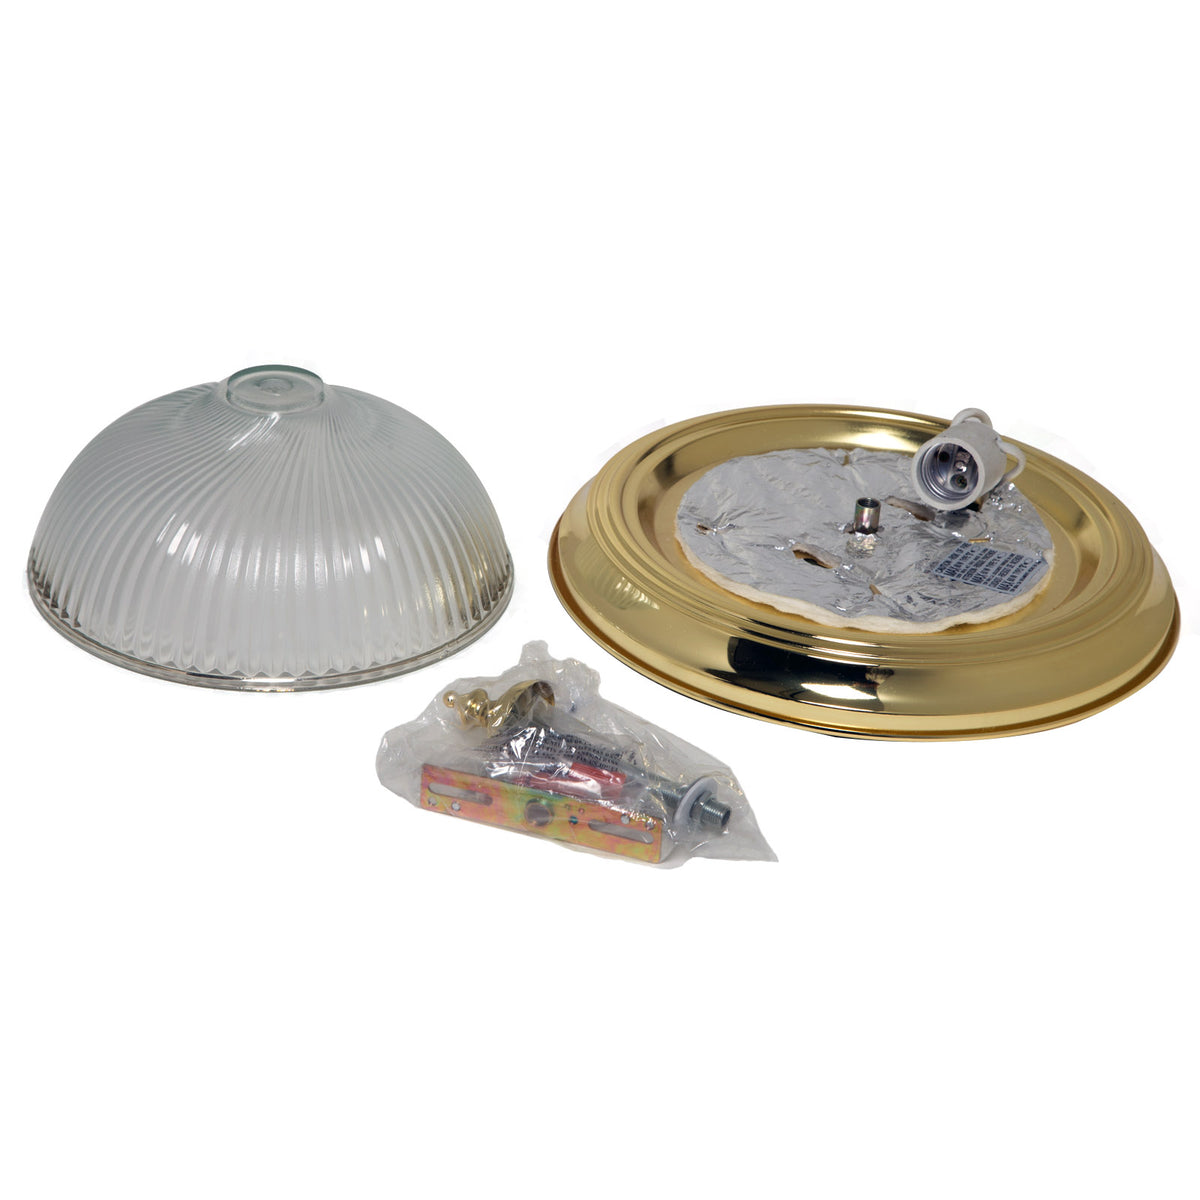 buy ceiling light fixtures at cheap rate in bulk. wholesale & retail commercial lighting goods store. home décor ideas, maintenance, repair replacement parts